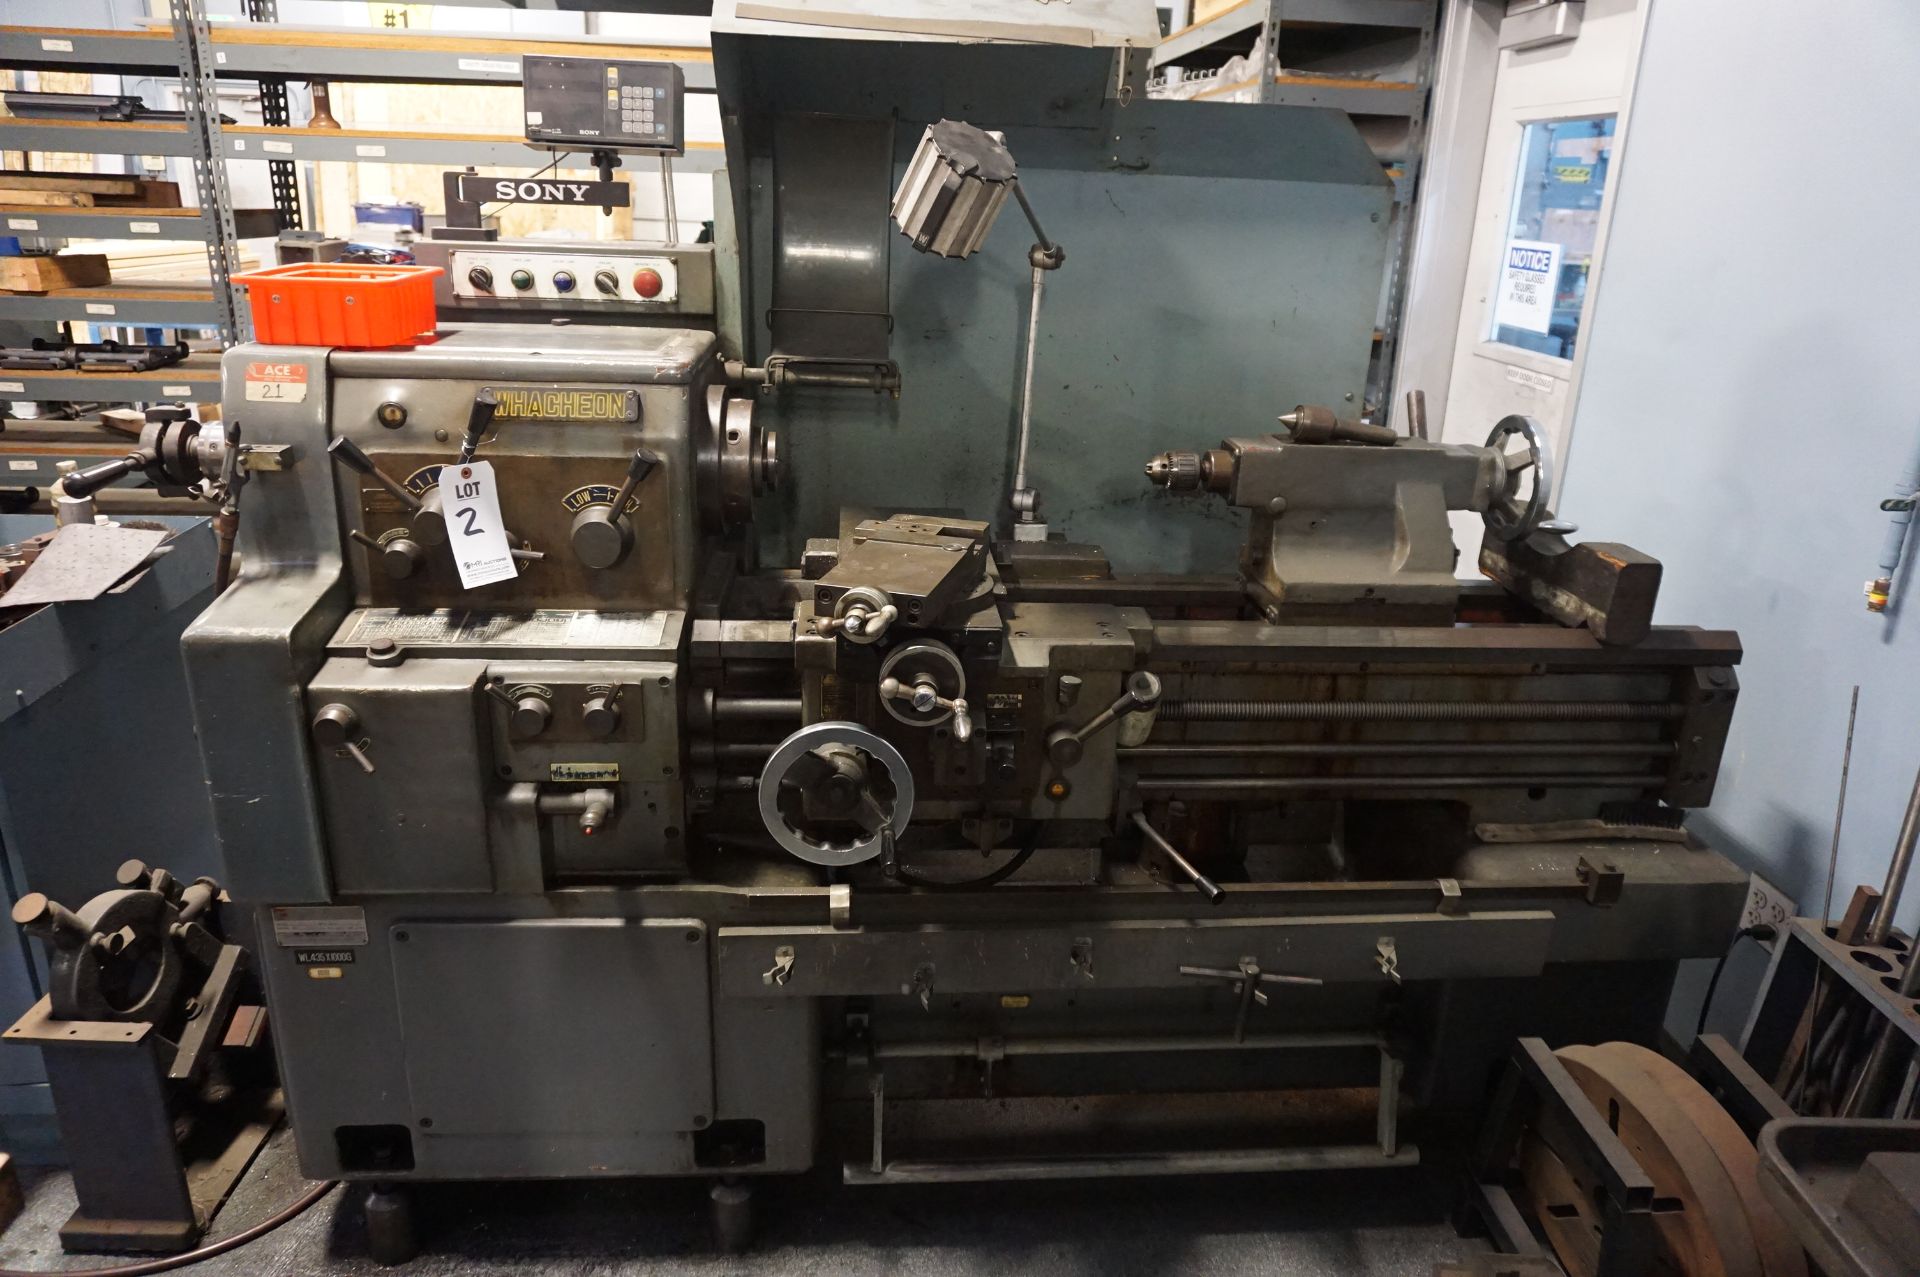 1988 WHACHEON TRADEMARK WL-435 X 1000G MACHINE LATHE WITH TAILSTOCK, S/N 8803-51 TO INCLUDE SONY - Image 9 of 15